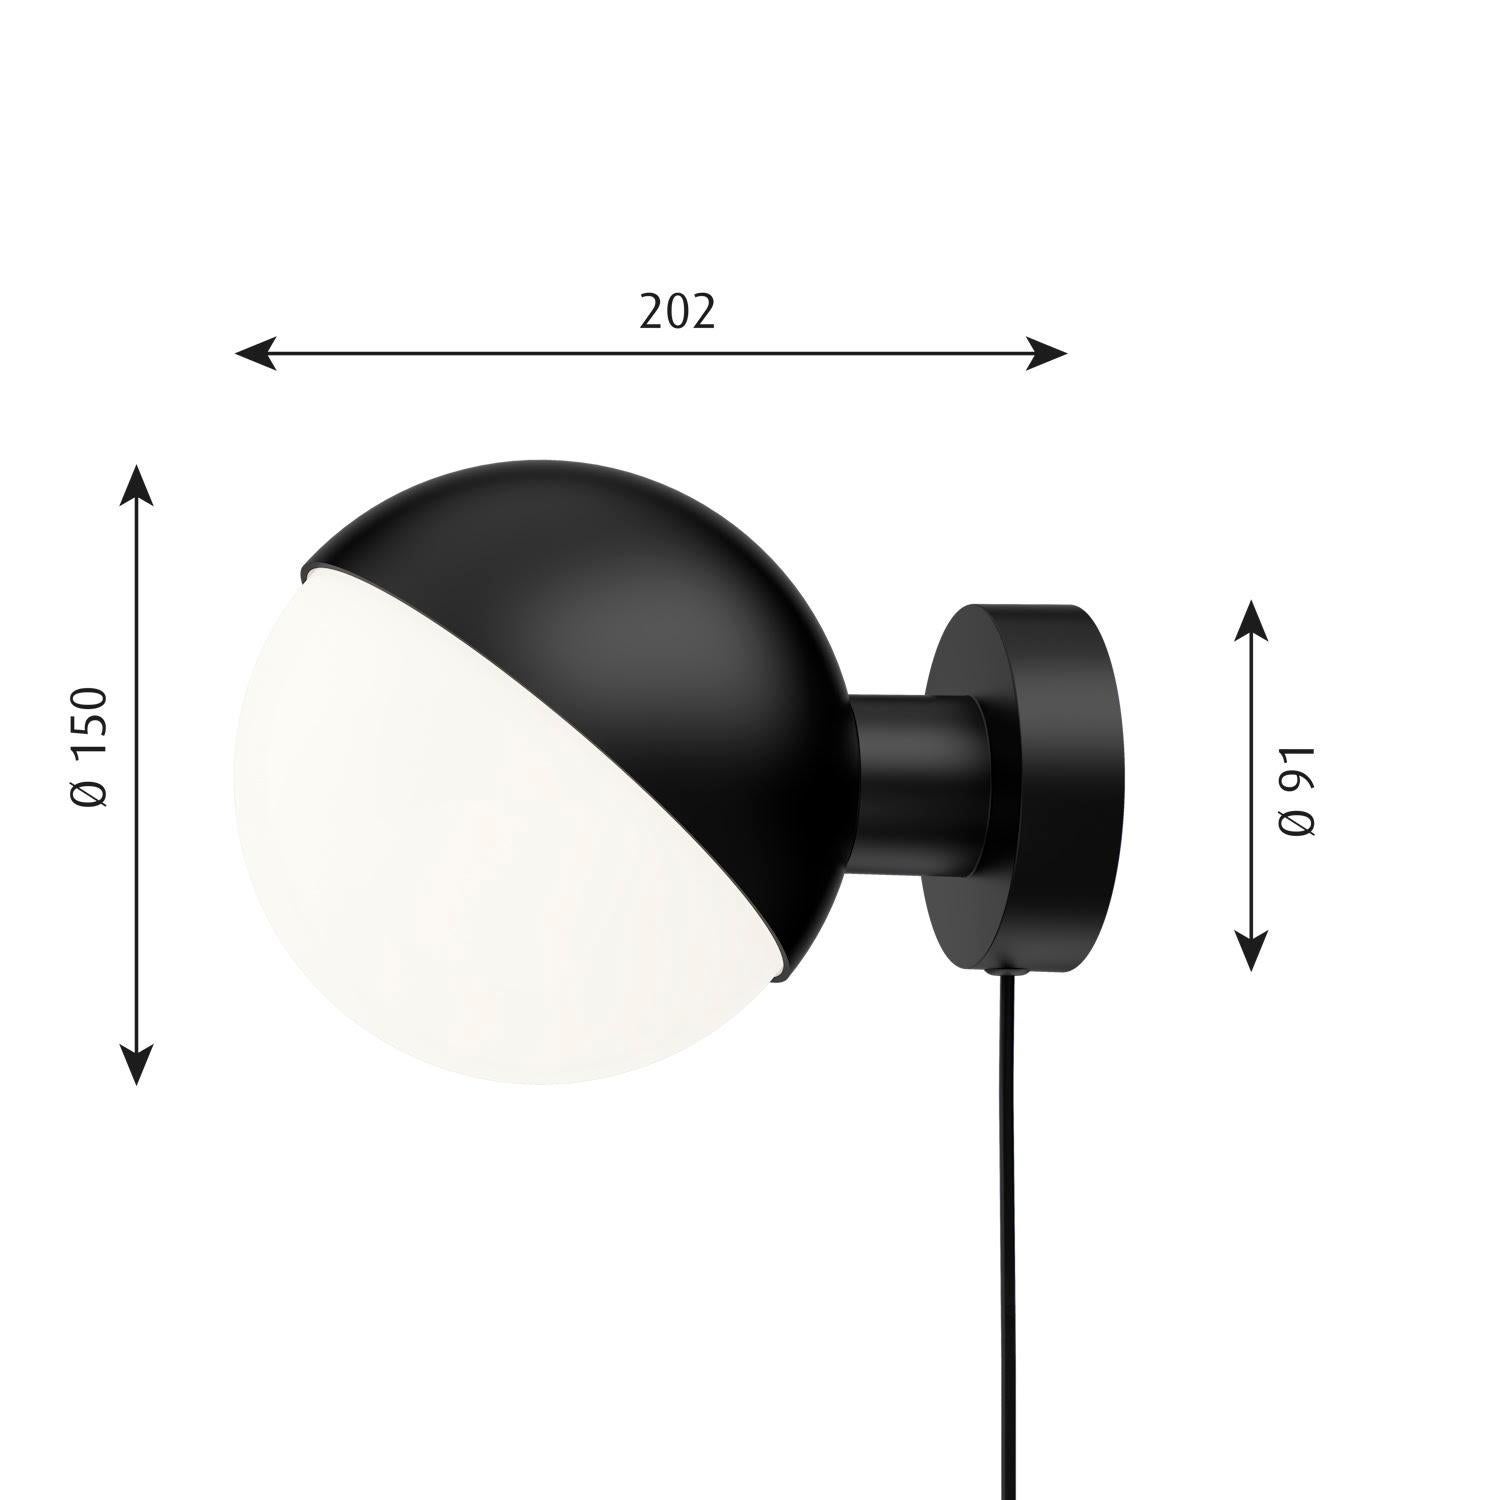 Wall lamp model VL Studio by Louis Poulsen

The VL Studio family is derived from a lamp model designed by architect Vilhelm Lauritzen for Radiohuset, Copenhagen's former Radio House, in the 1940s.  The wall lamp produces diffused light through